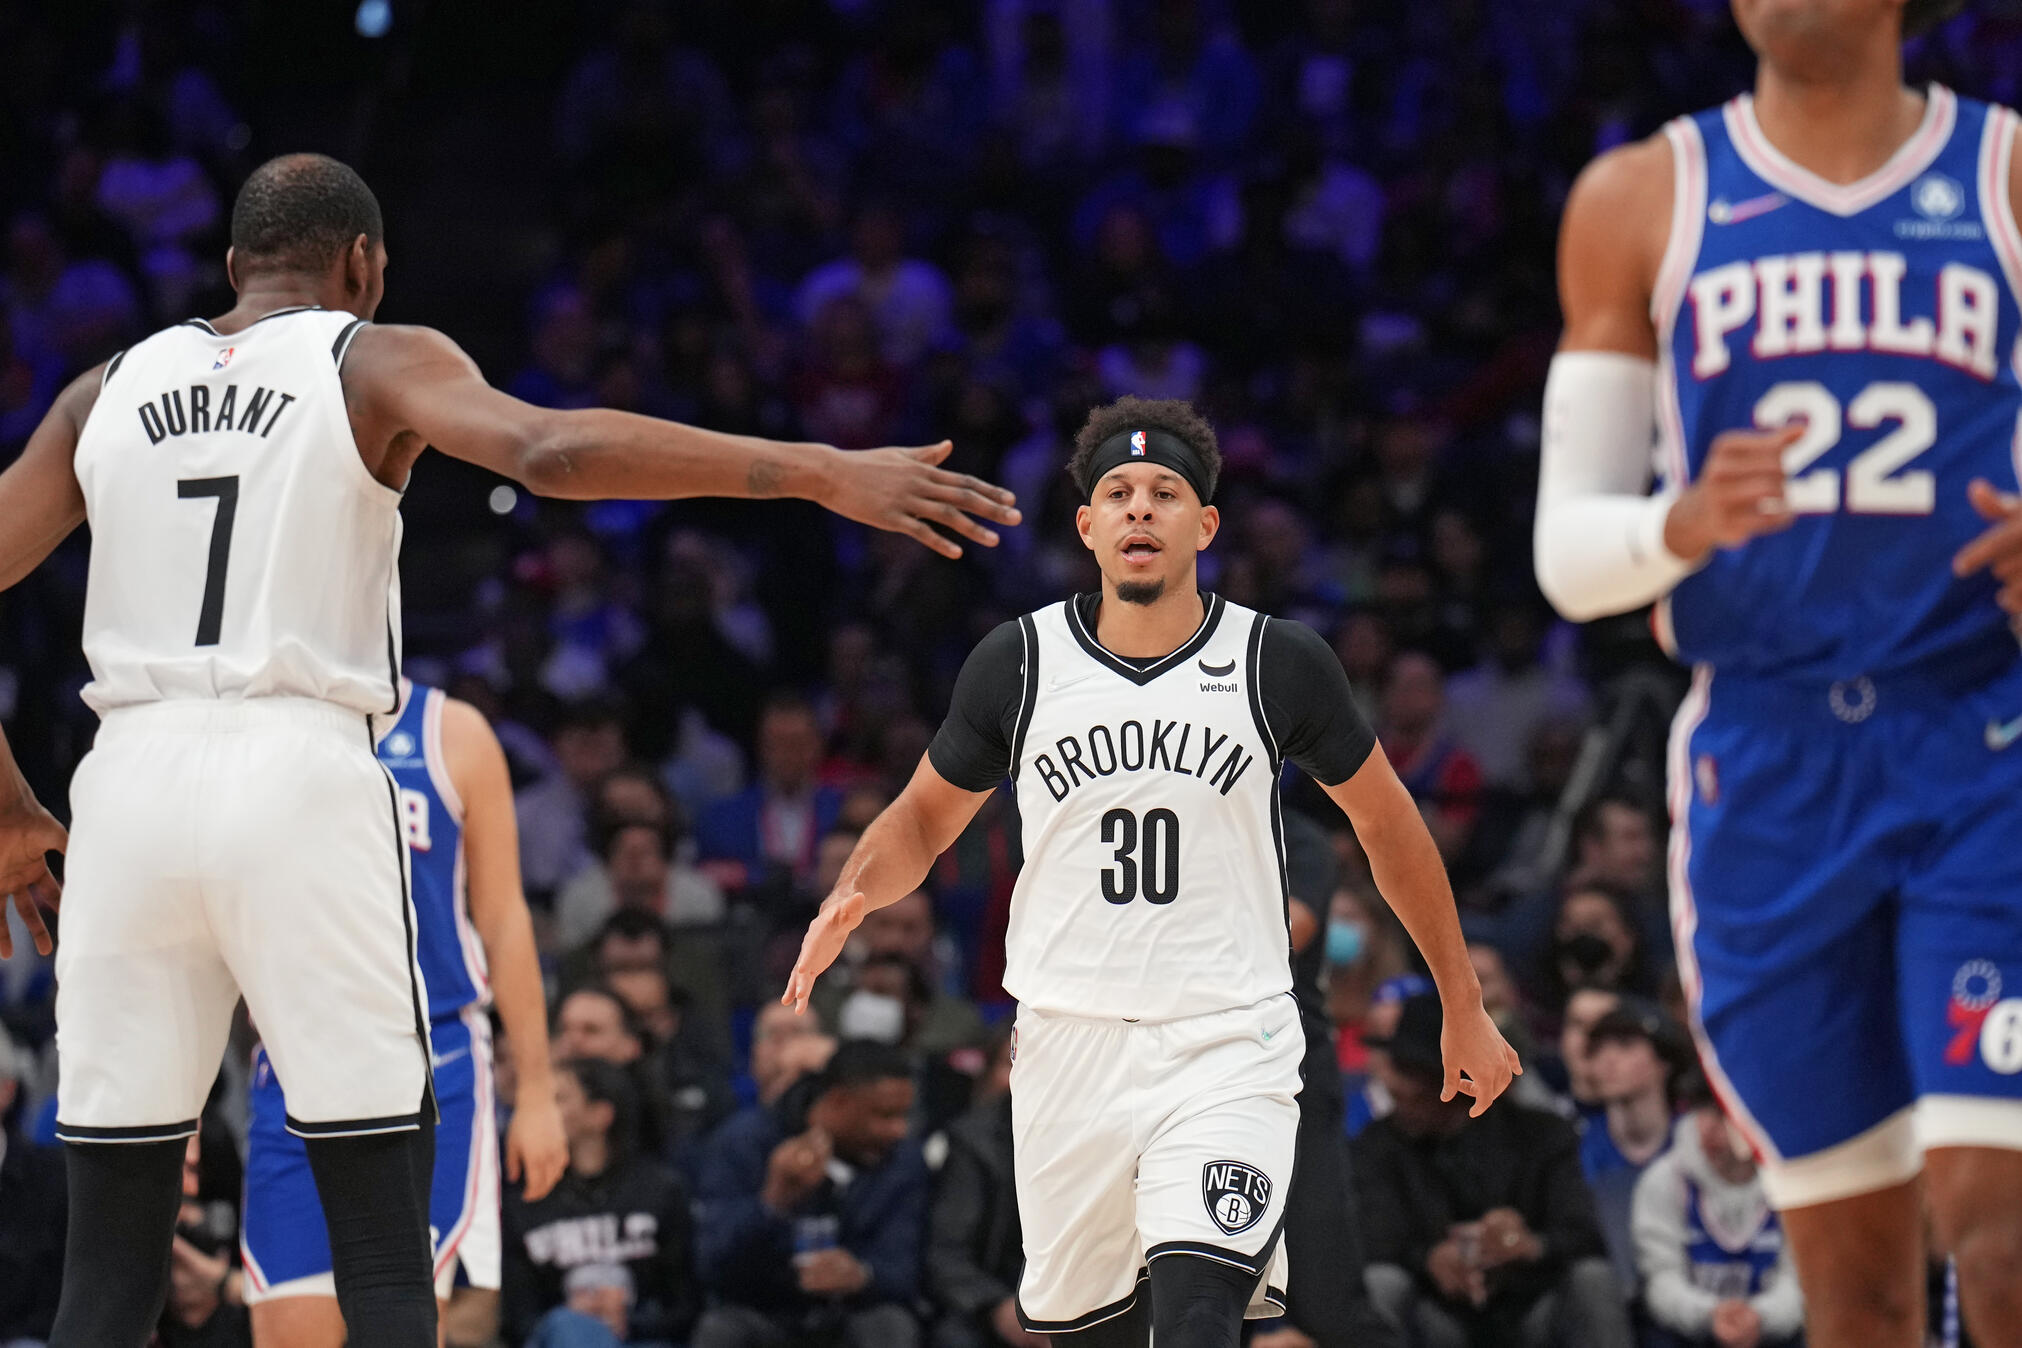 PHILADELPHIA, PA - MARCH 10: Seth Curry #30 of the Brooklyn Nets reacts during a game against the Philadelphia 76ers on March 10, 2022 at Wells Fargo Center in Philadelphia, Pennsylvania. (Jesse D. Garrabrant/NBAE via Getty Images)